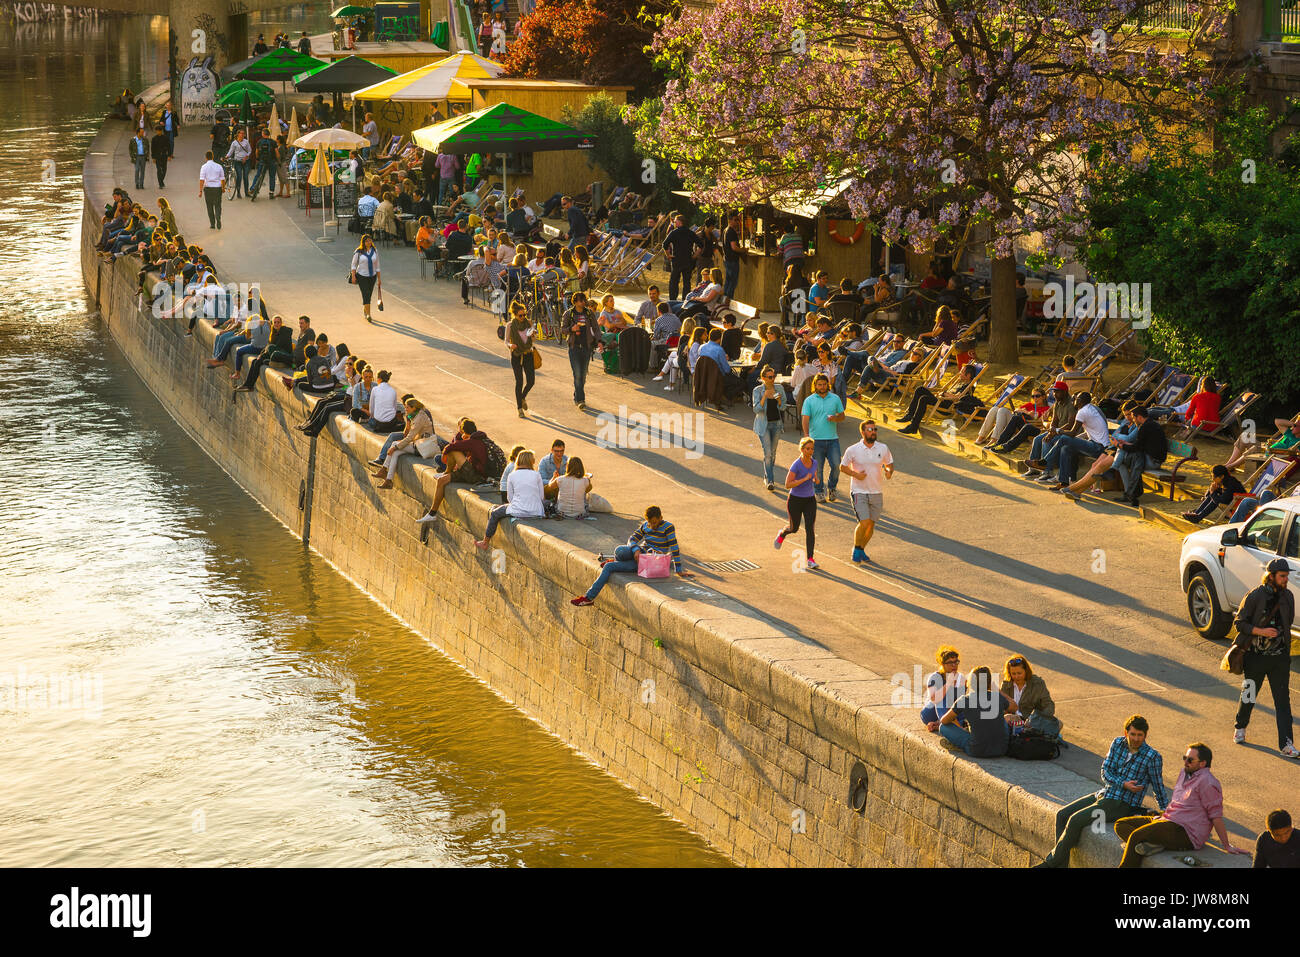 Vienna canal summer, view of the Danube Canal embankment in the Schwedenplatz area of Vienna, a popular site for people to relax in the summer months. Stock Photo